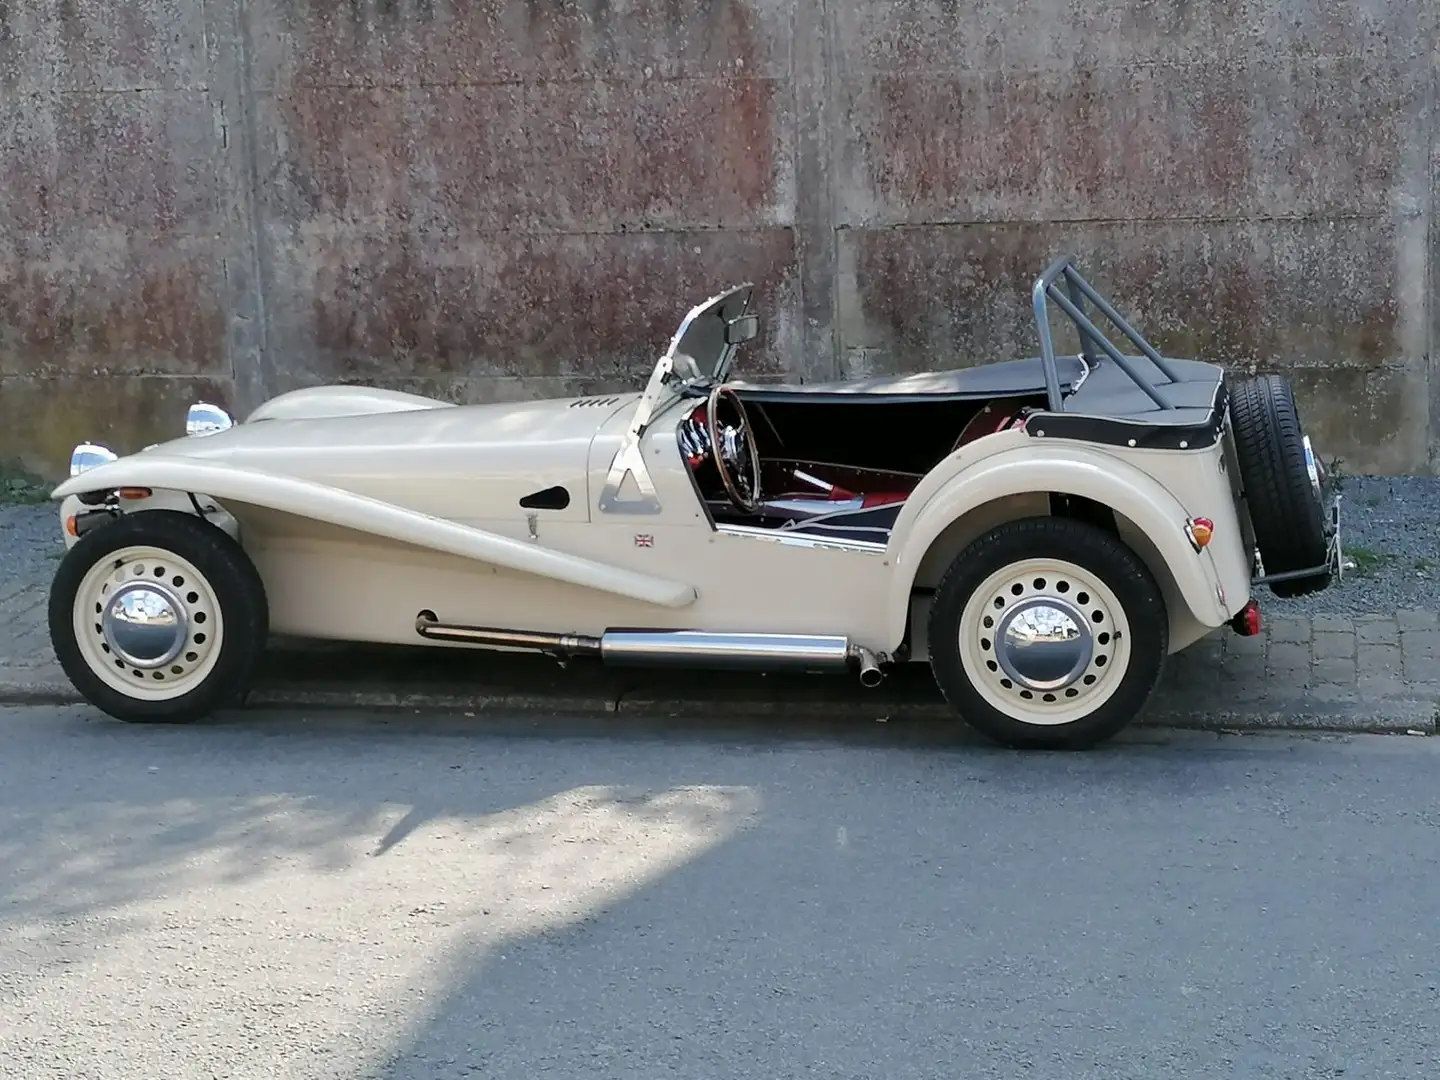 Caterham Classic S7 seven sprint limited edition Beige - 1